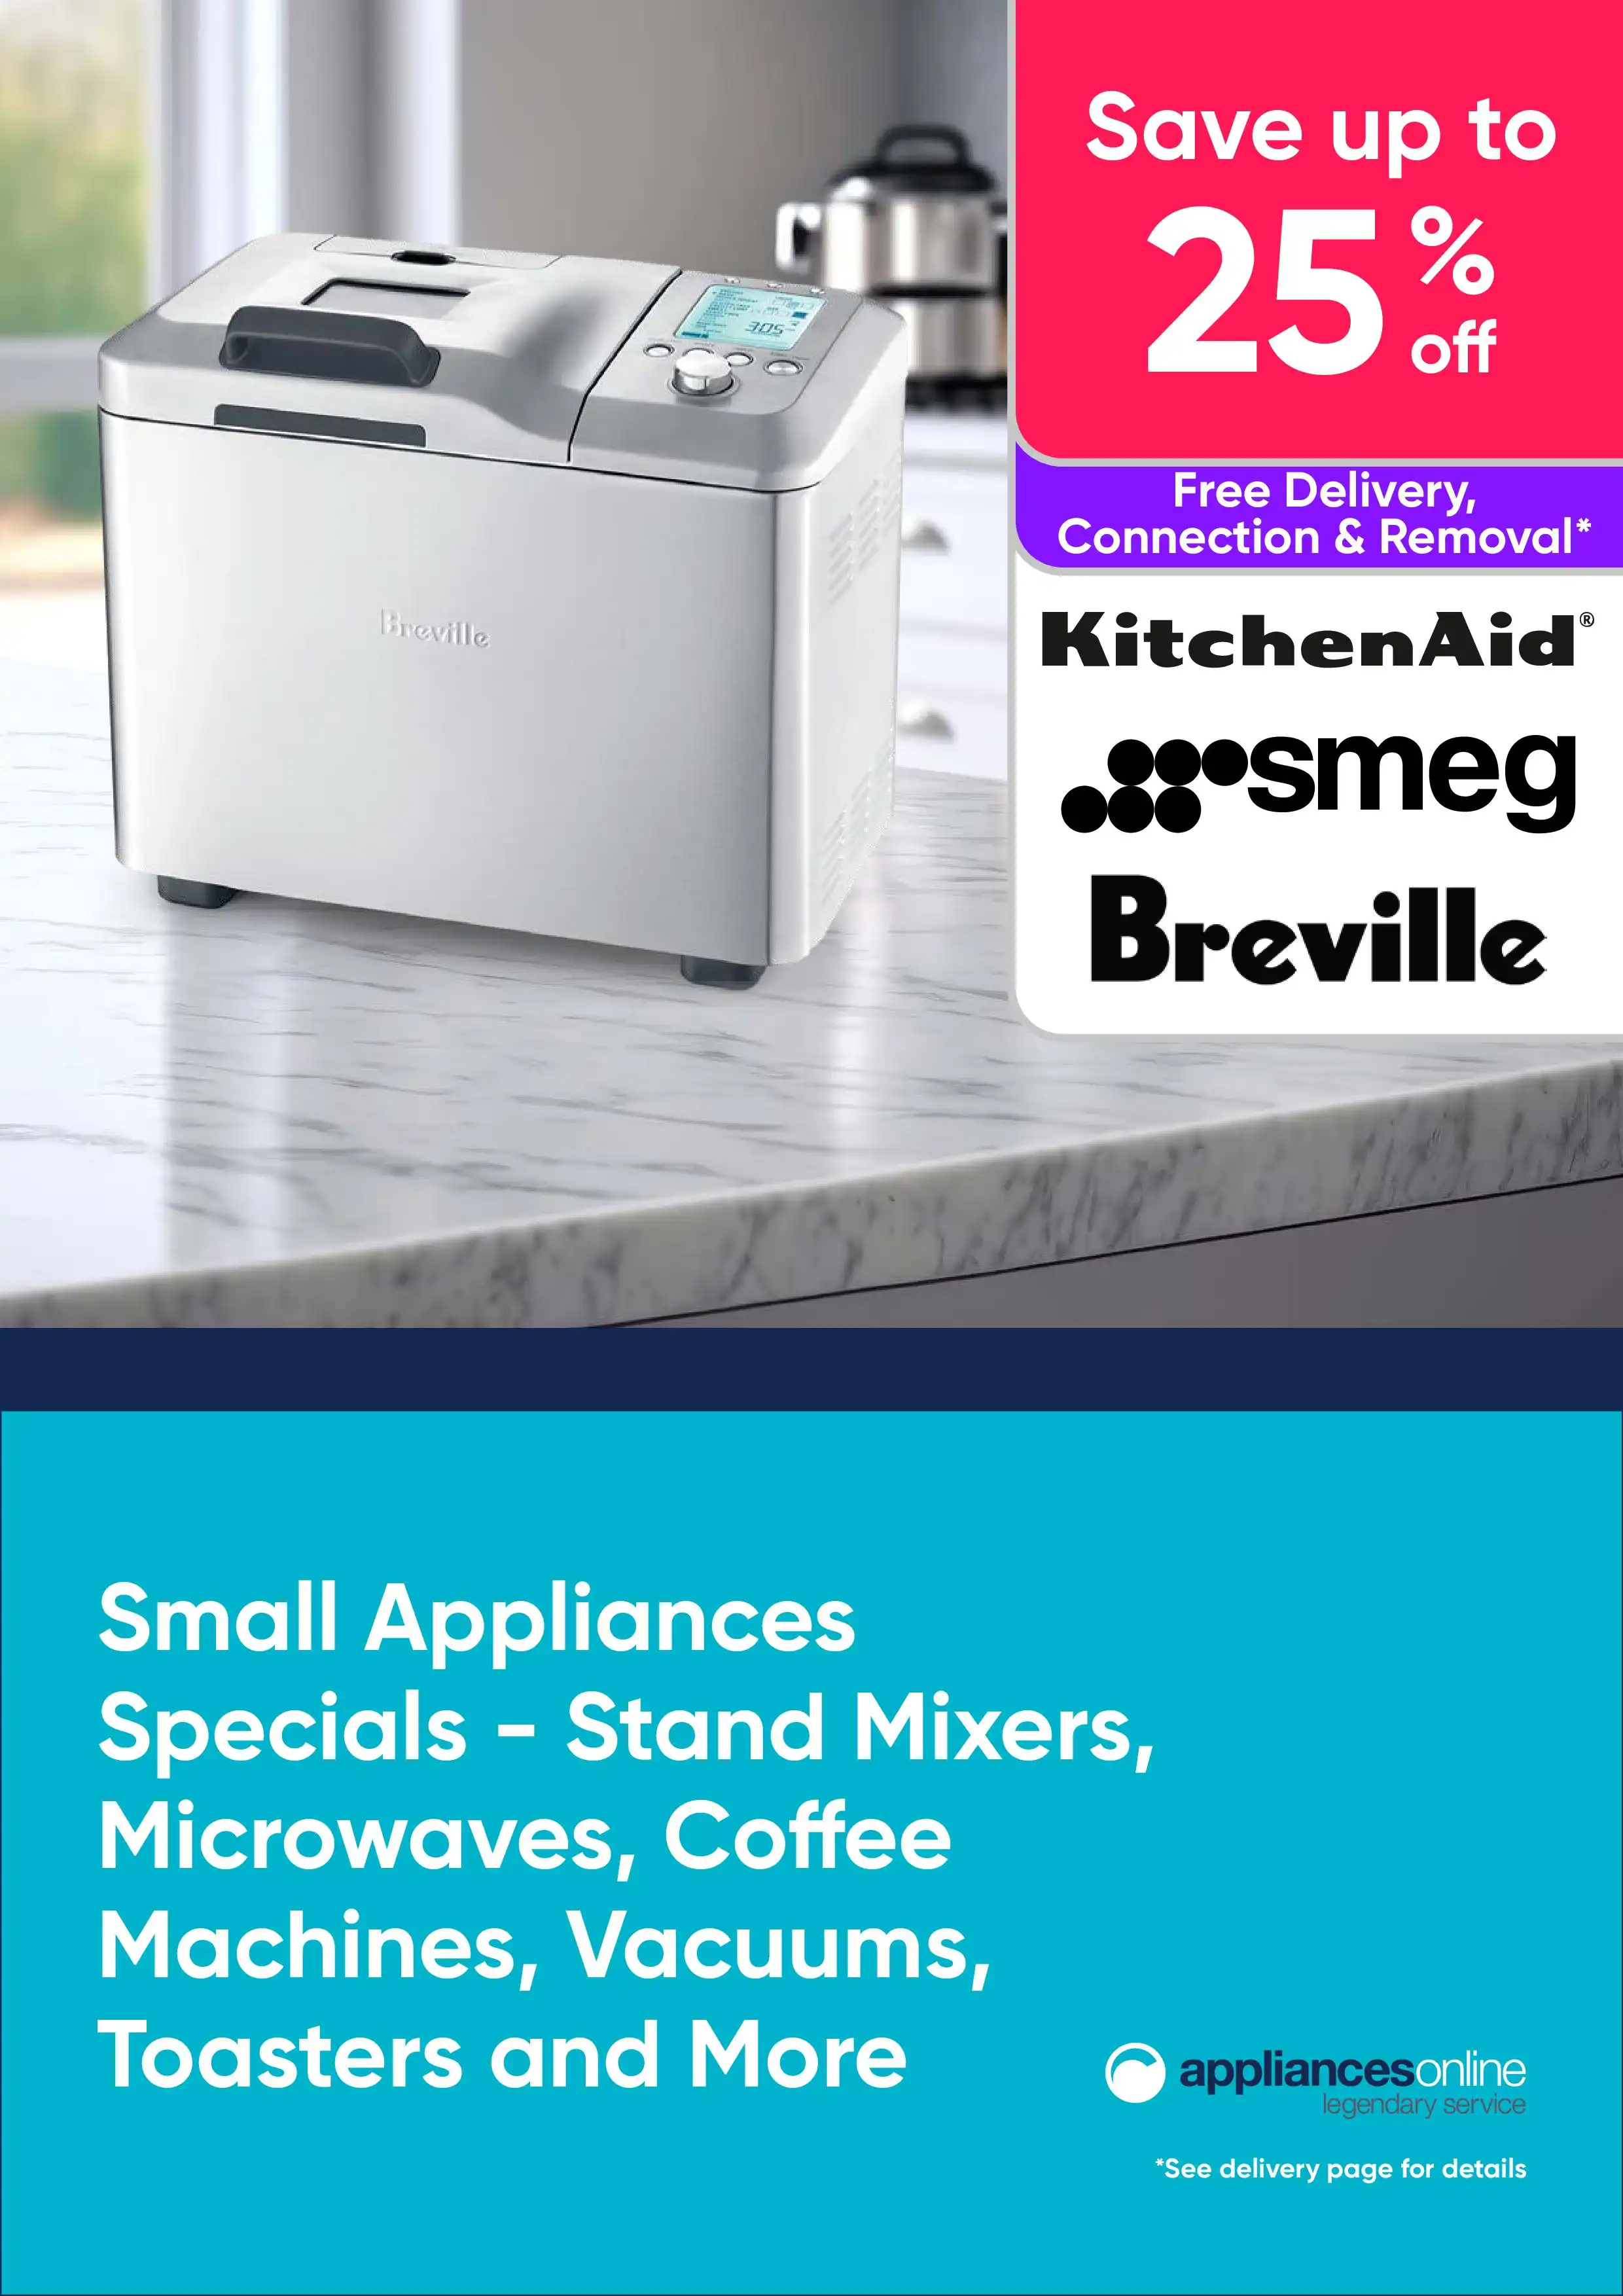 Appliances Online Small Appliances Specials - Save Up to 25% RRP On Stand Mixer, Microwave and More